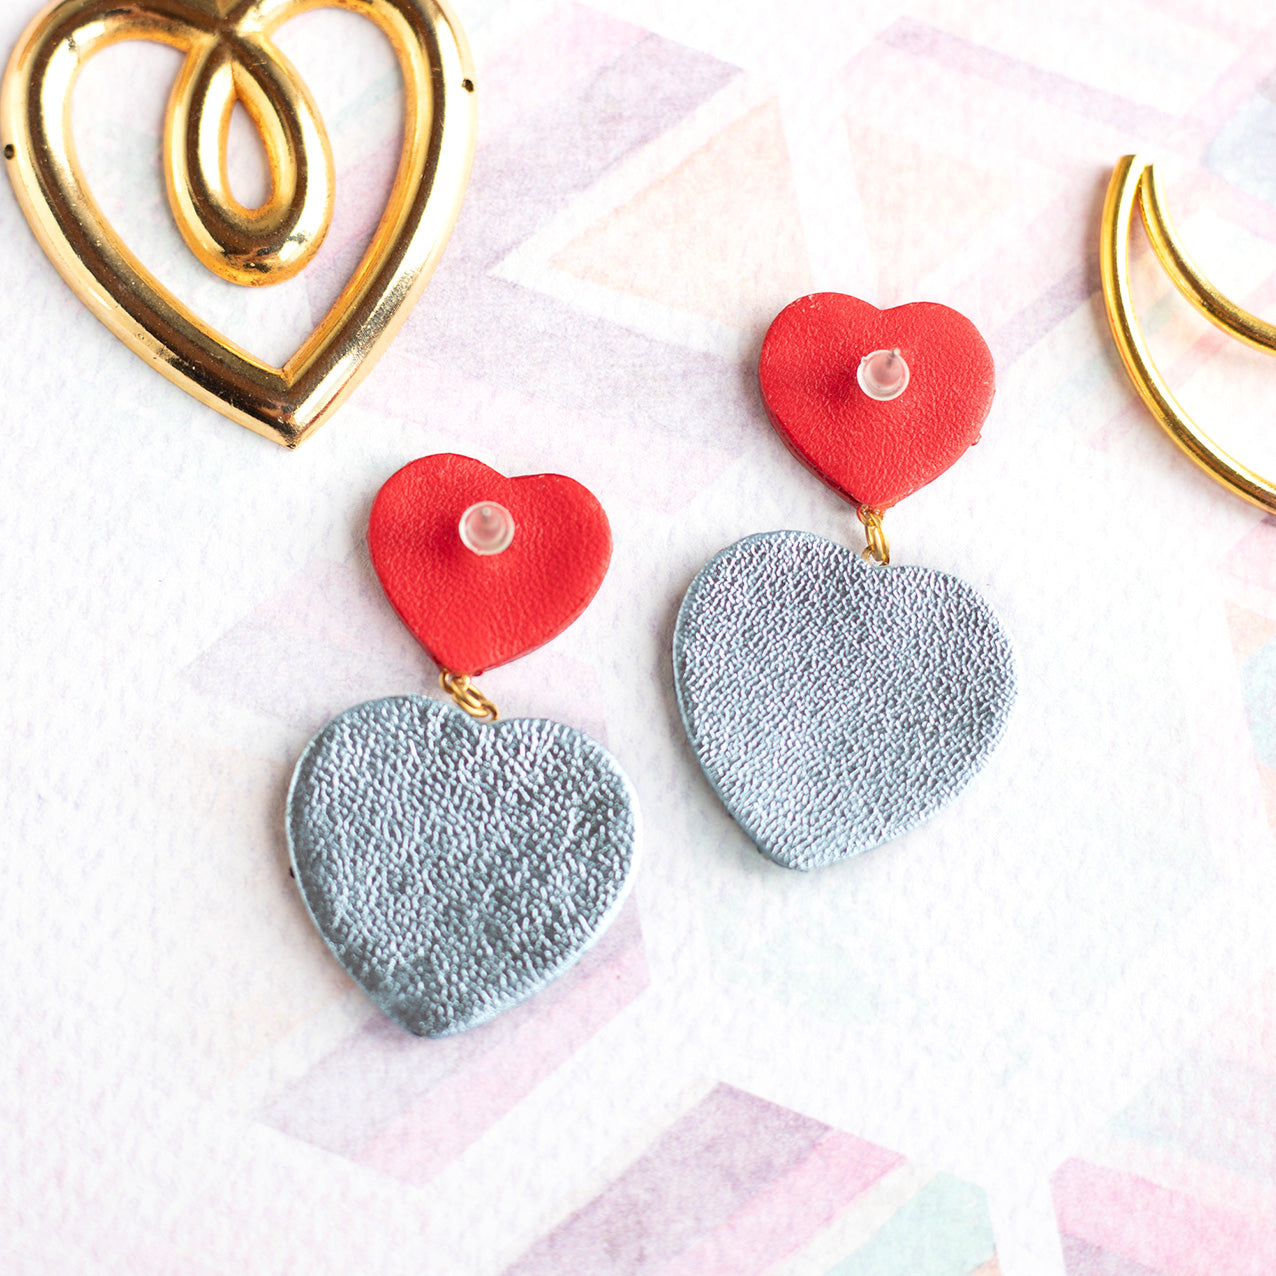 Heart earrings - red leather and silver glitter